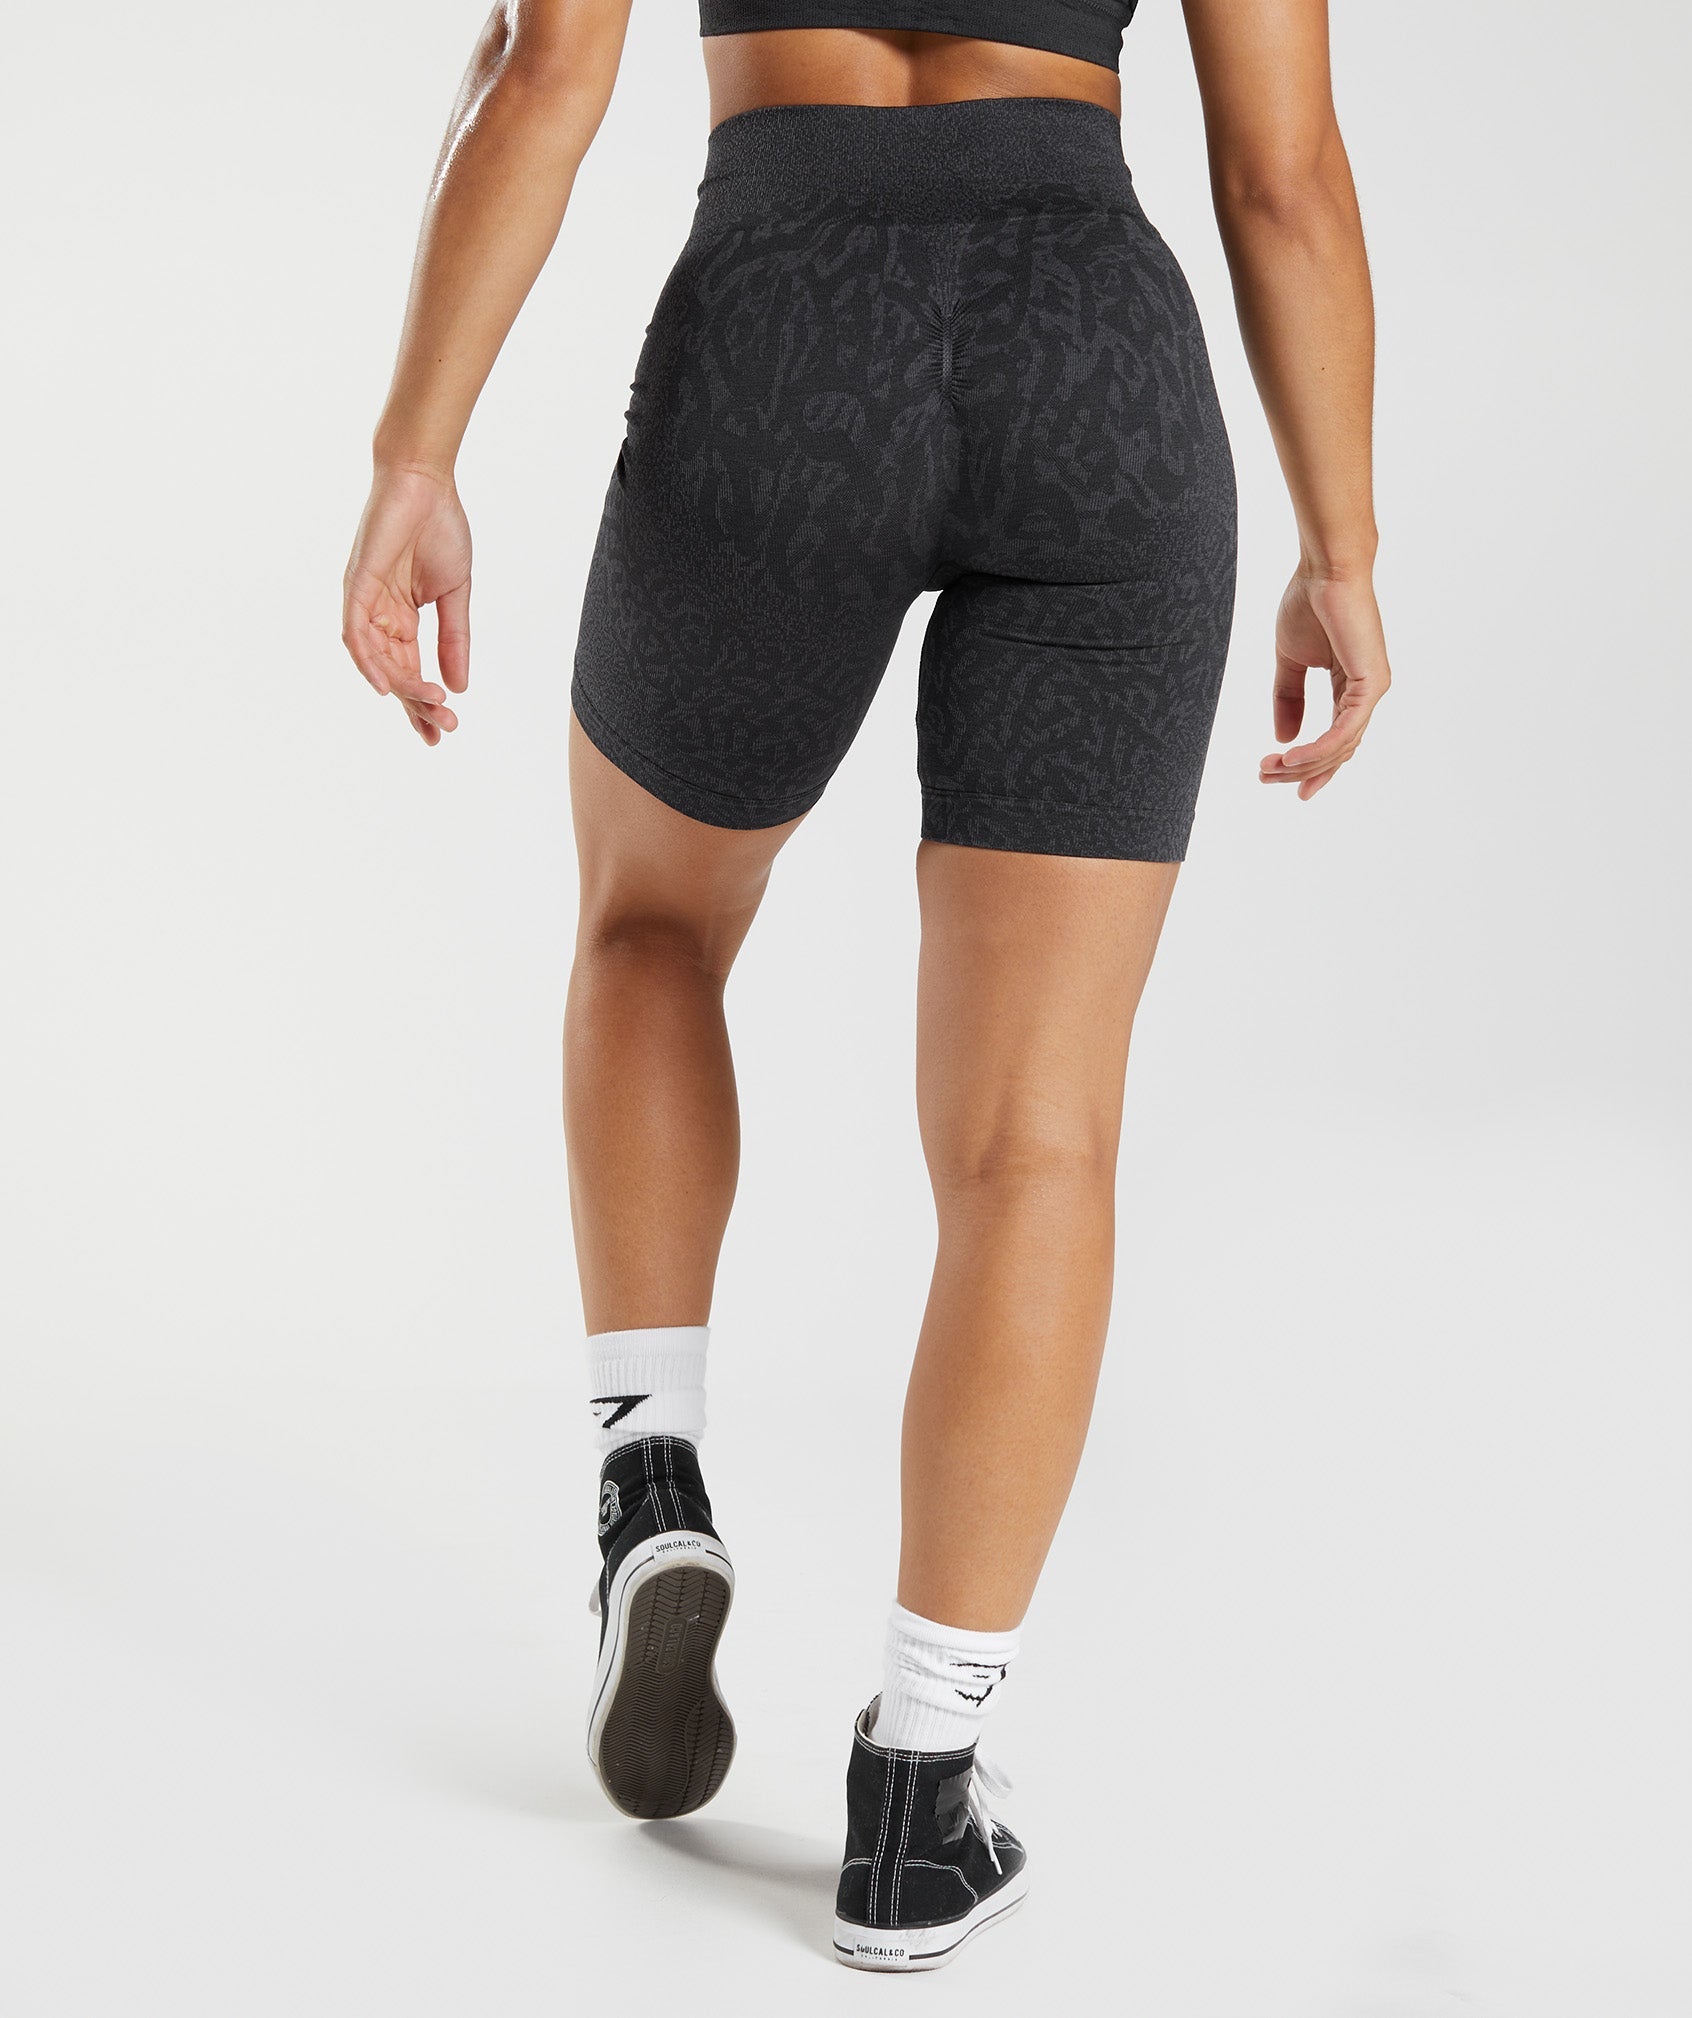 Adapt Animal Seamless Cycling Shorts in Reef |  Black